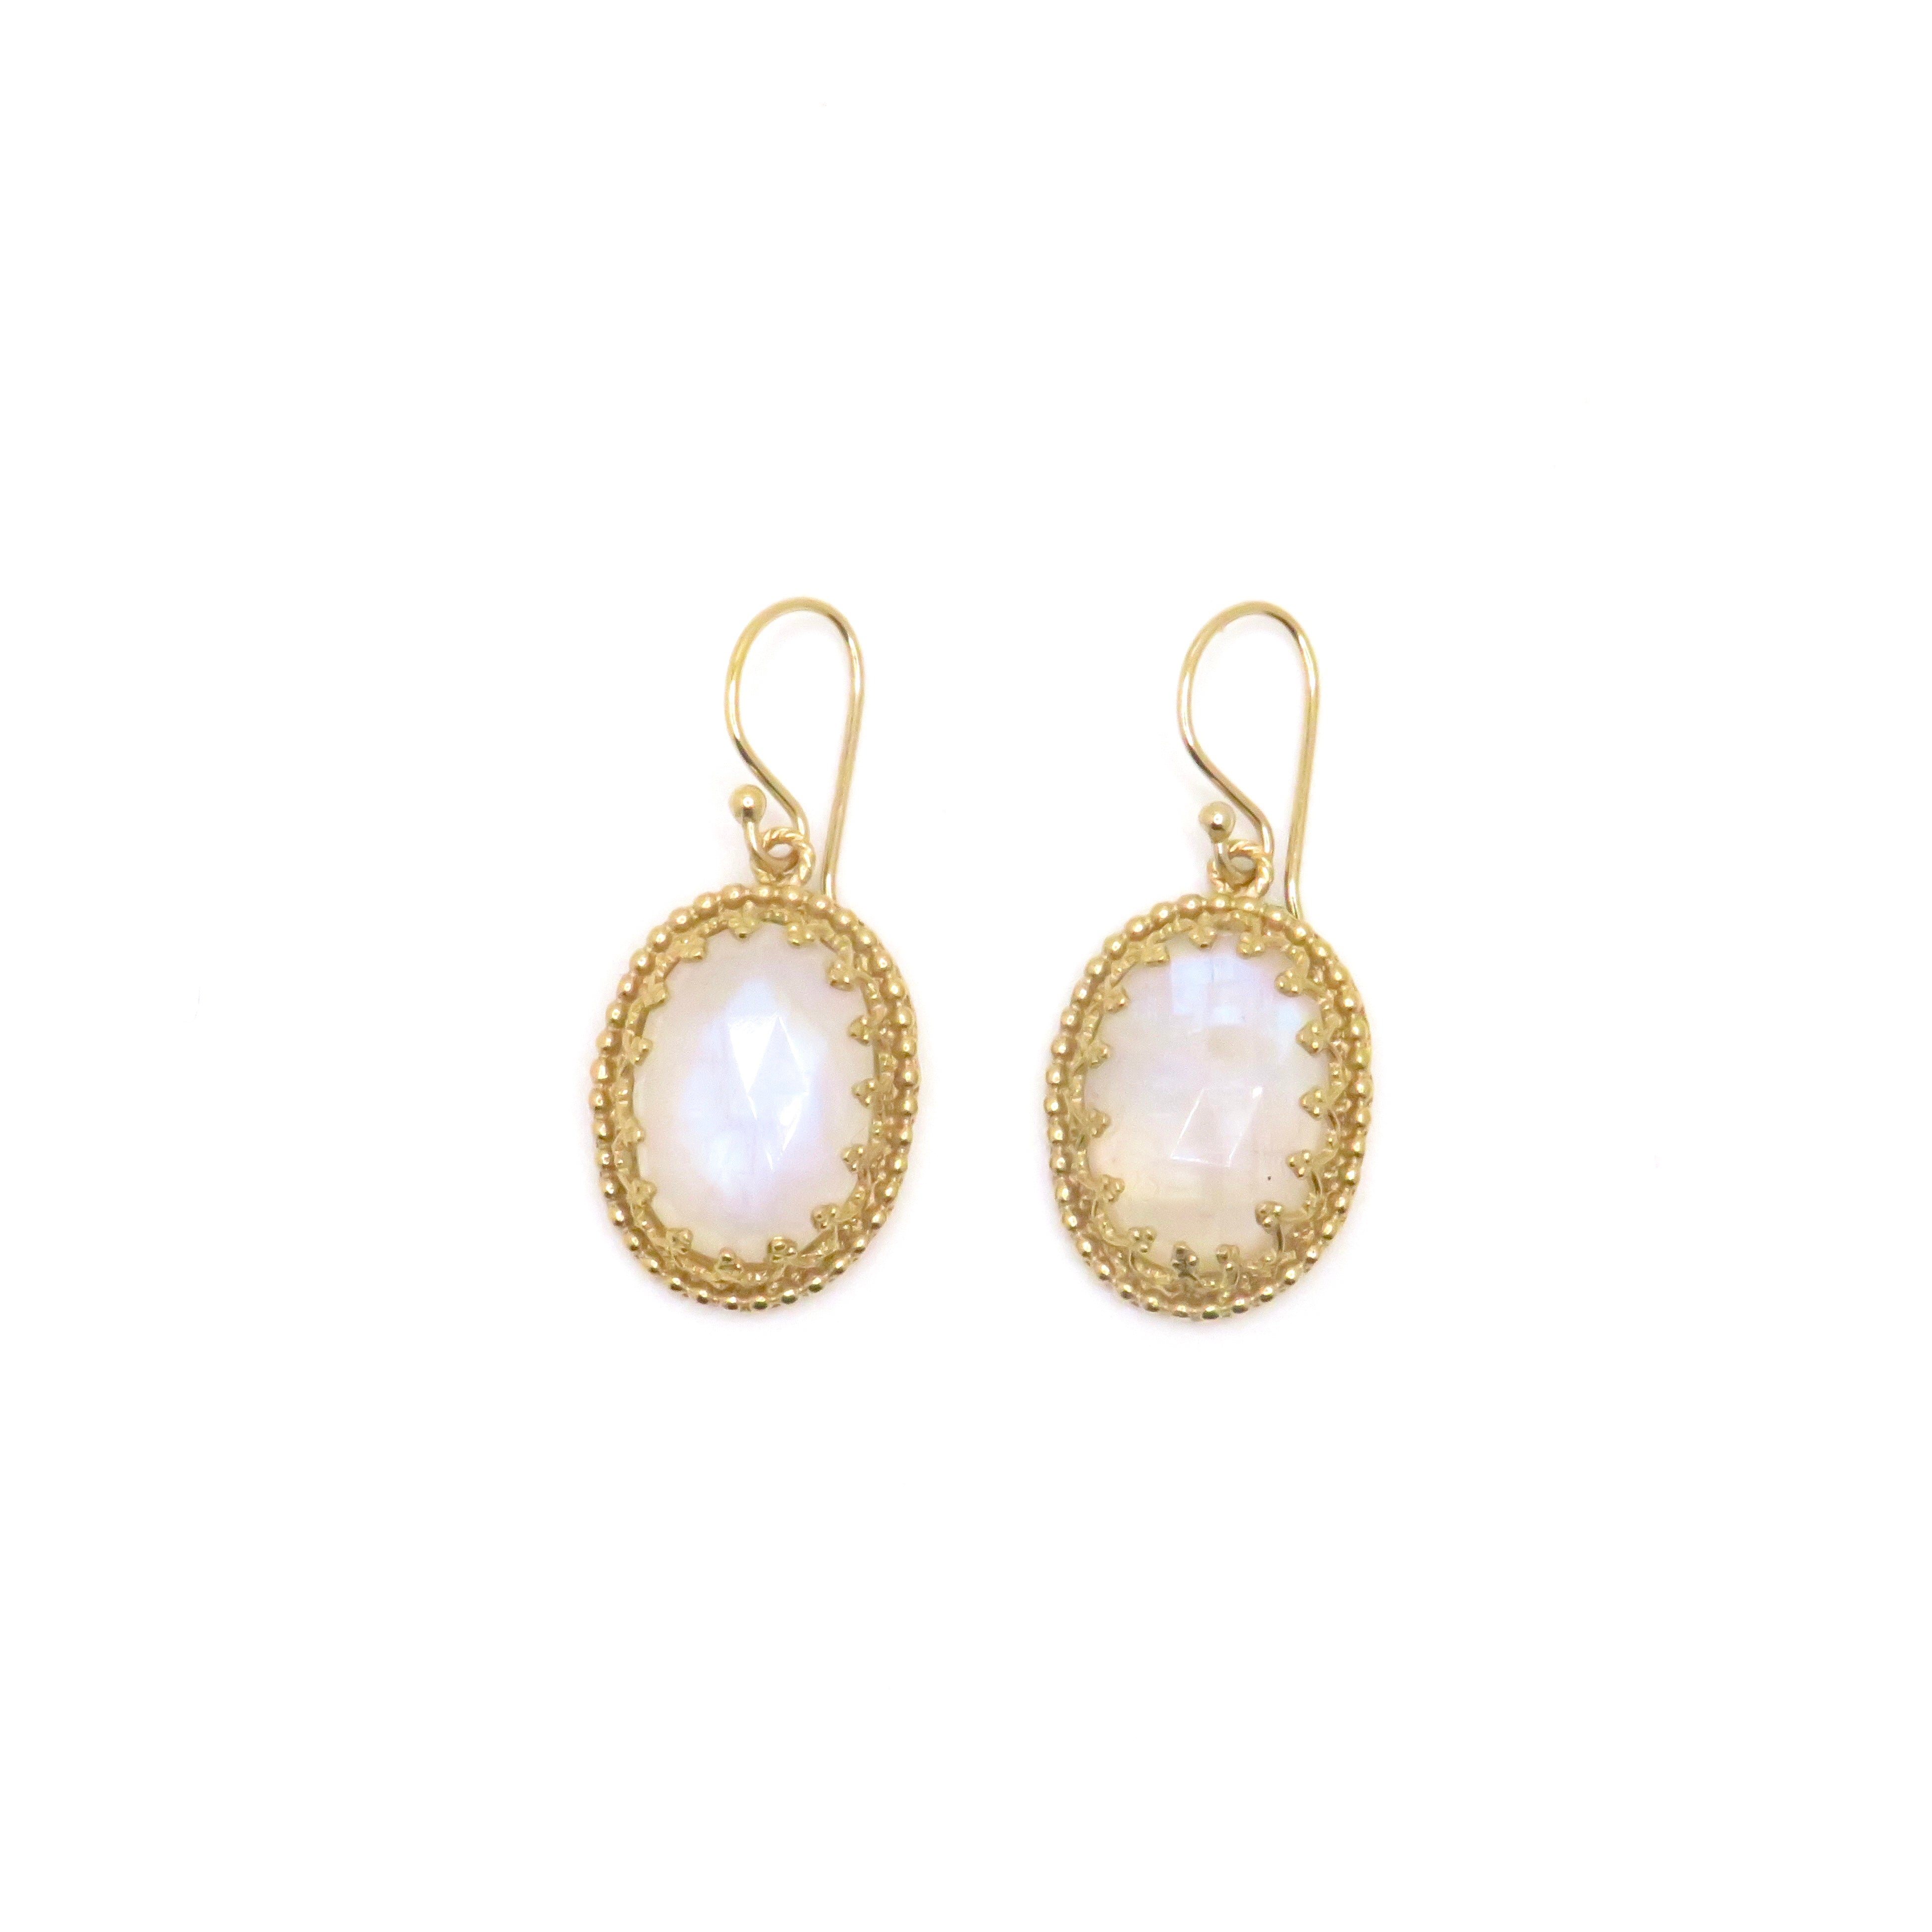 gold drop earrings with white gemstone